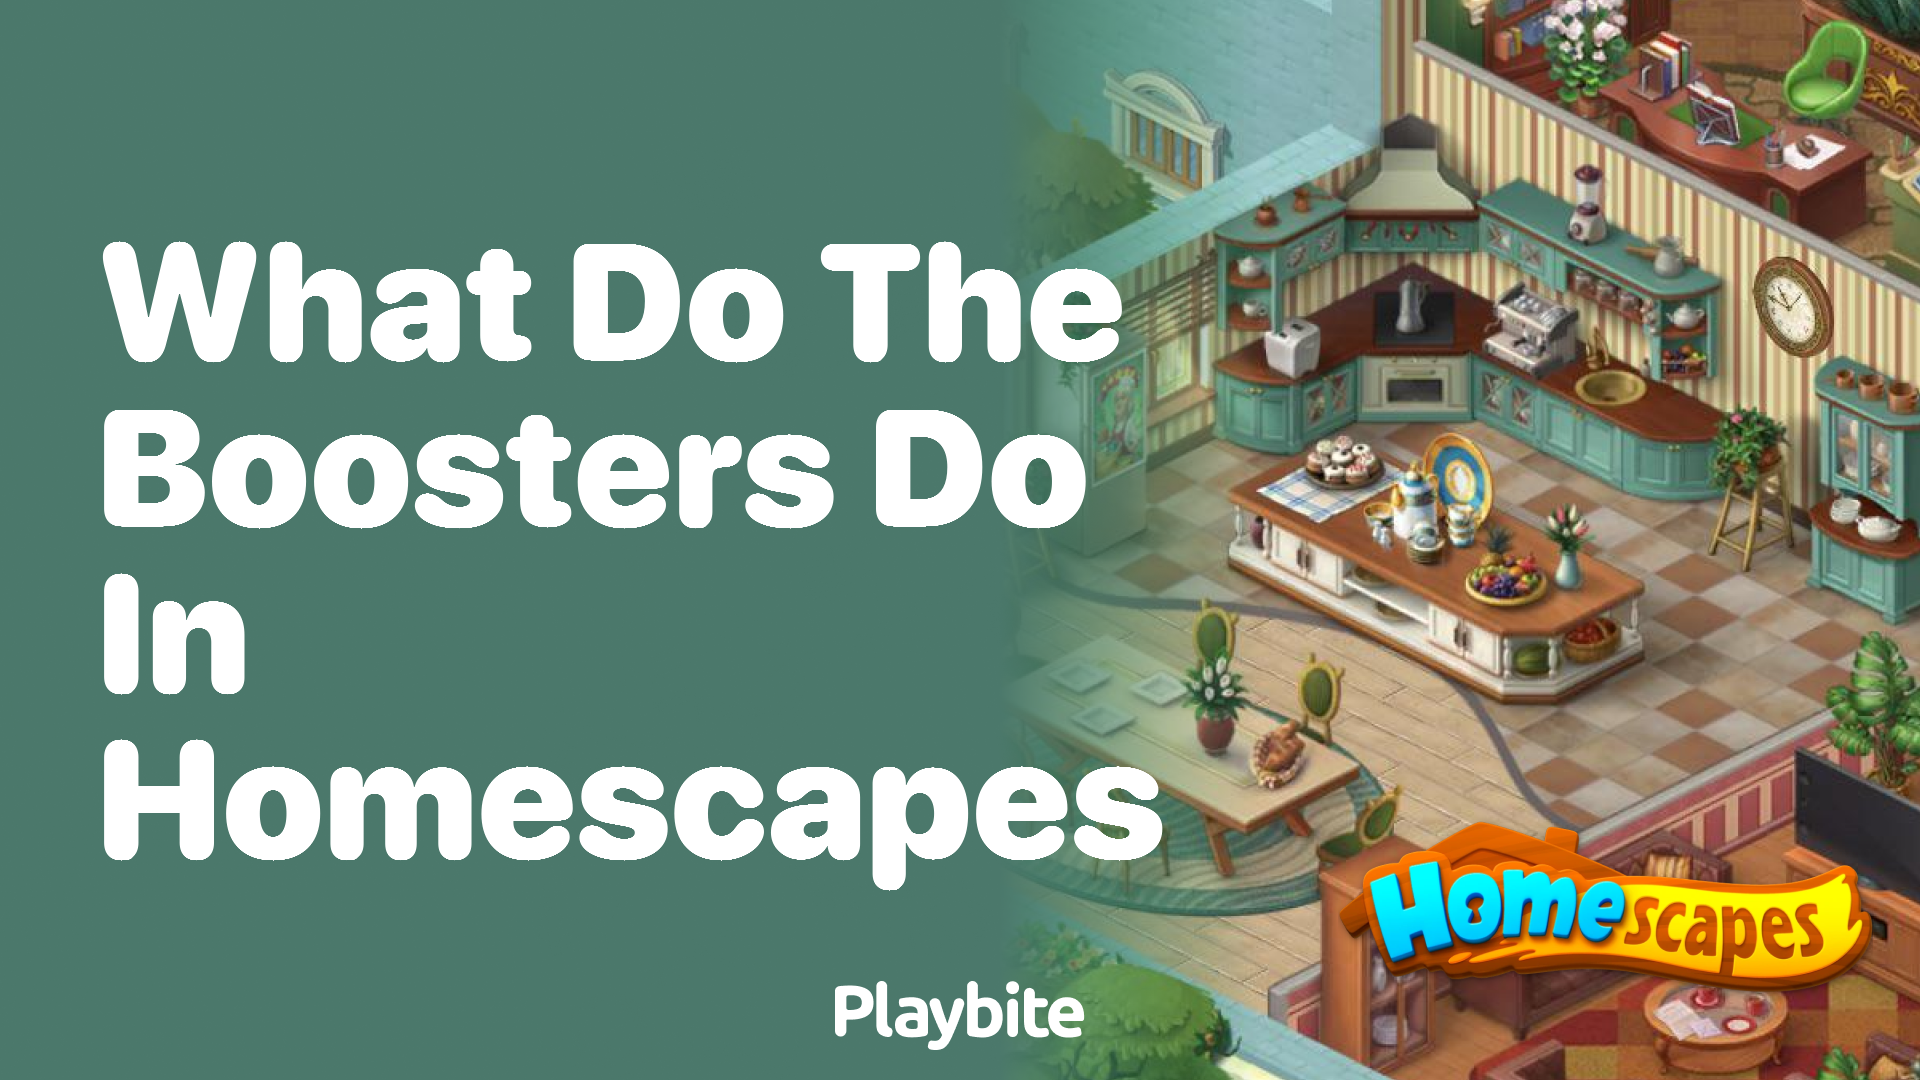 What do the boosters do in Homescapes?